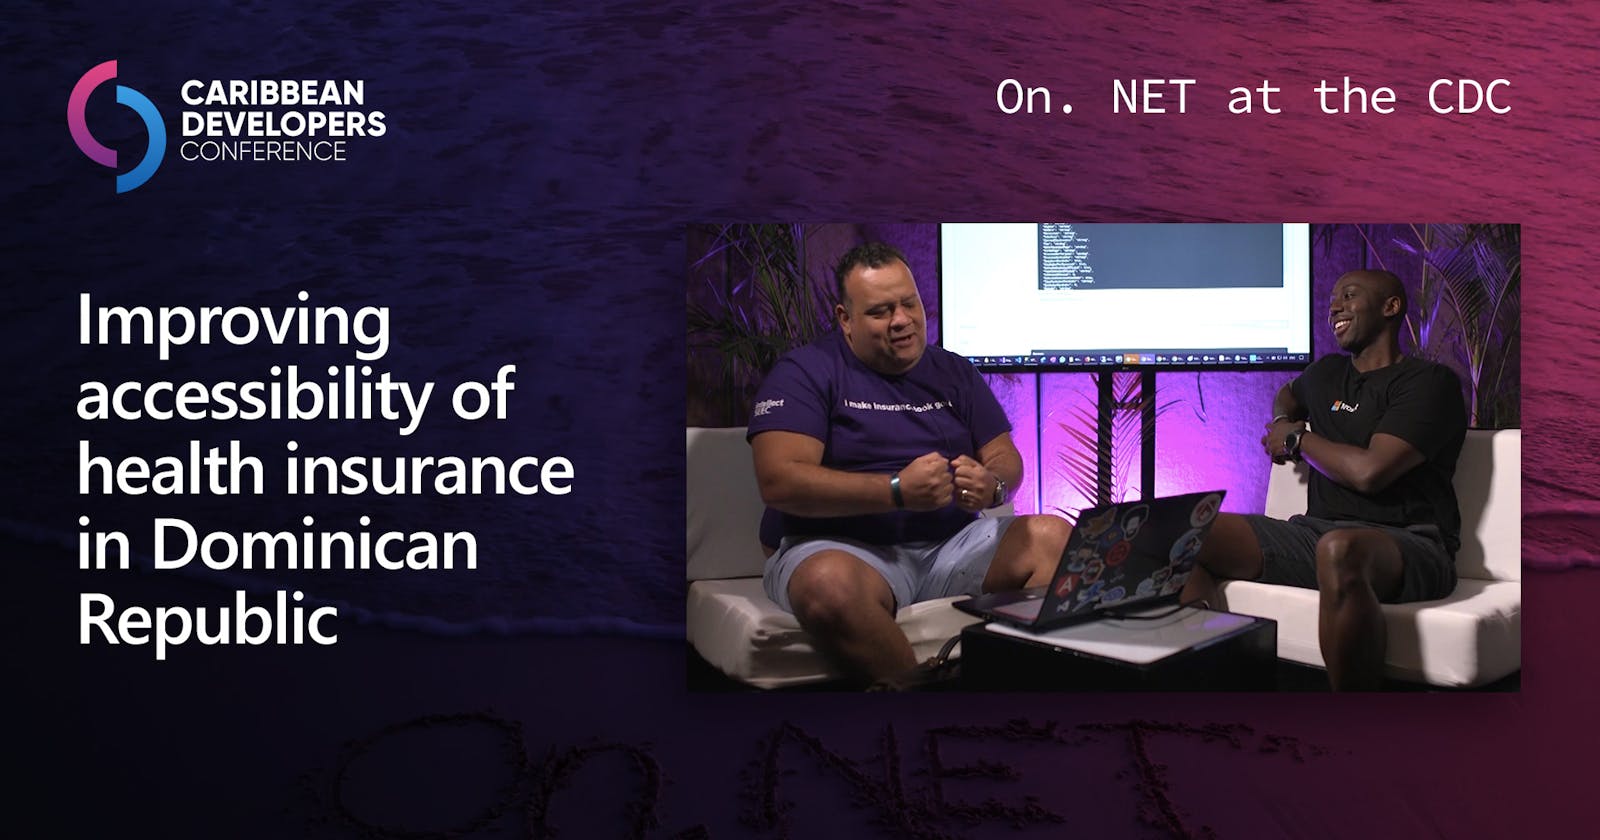 On.NET Episode: Improving accessibility of health insurance in the Dominican Republic